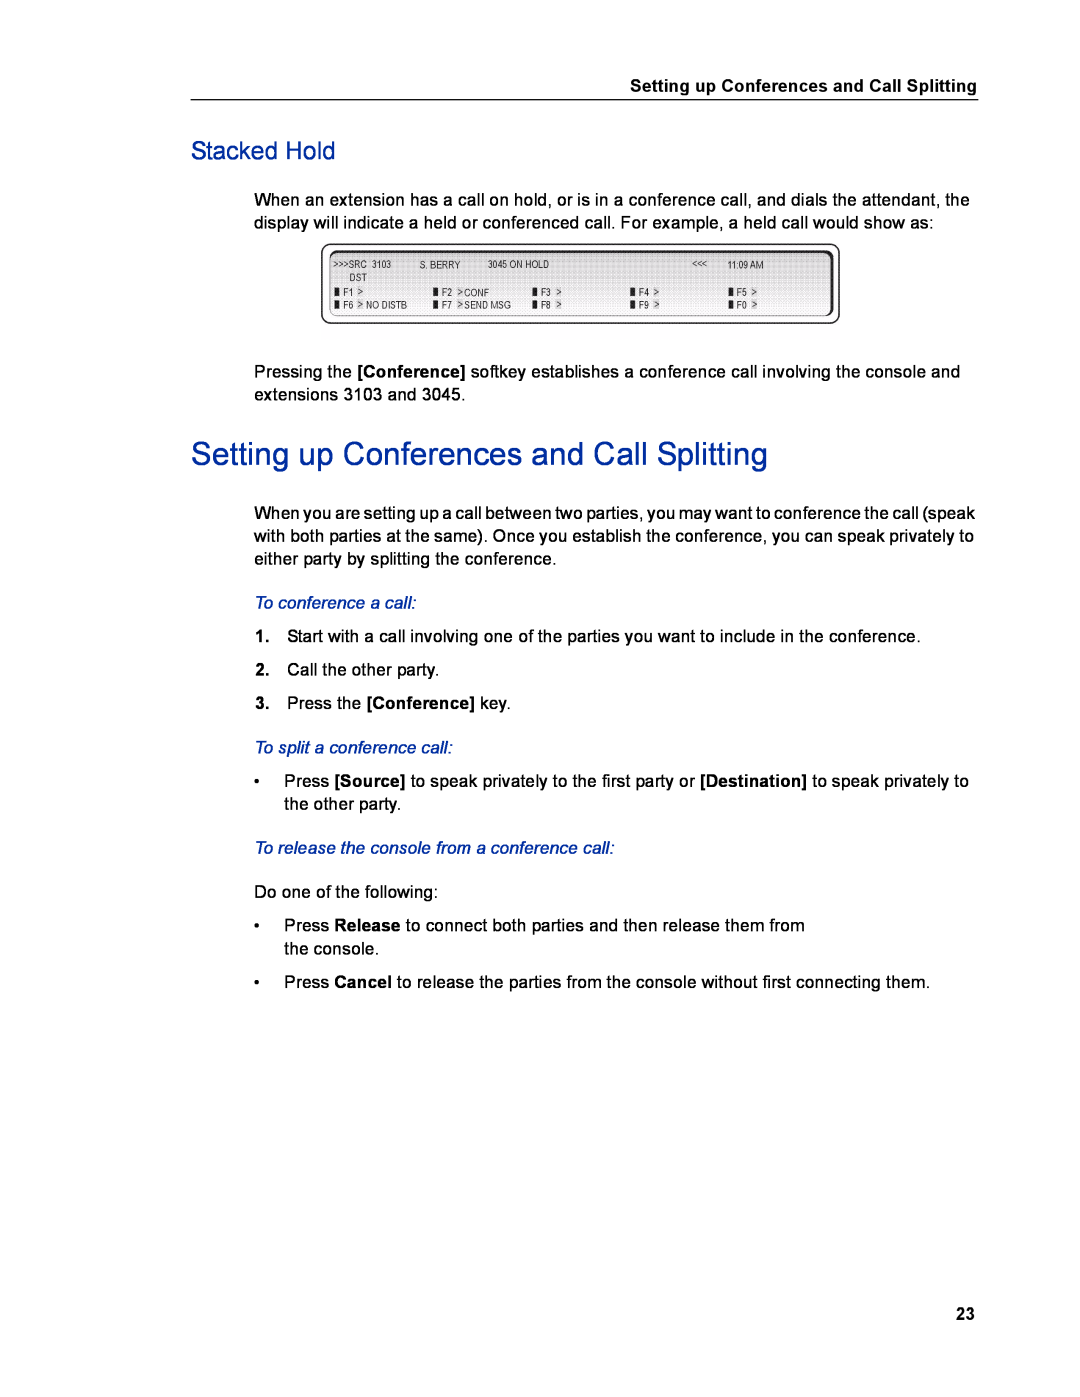 Mitel 5540 manual Setting up Conferences and Call Splitting, Stacked Hold 